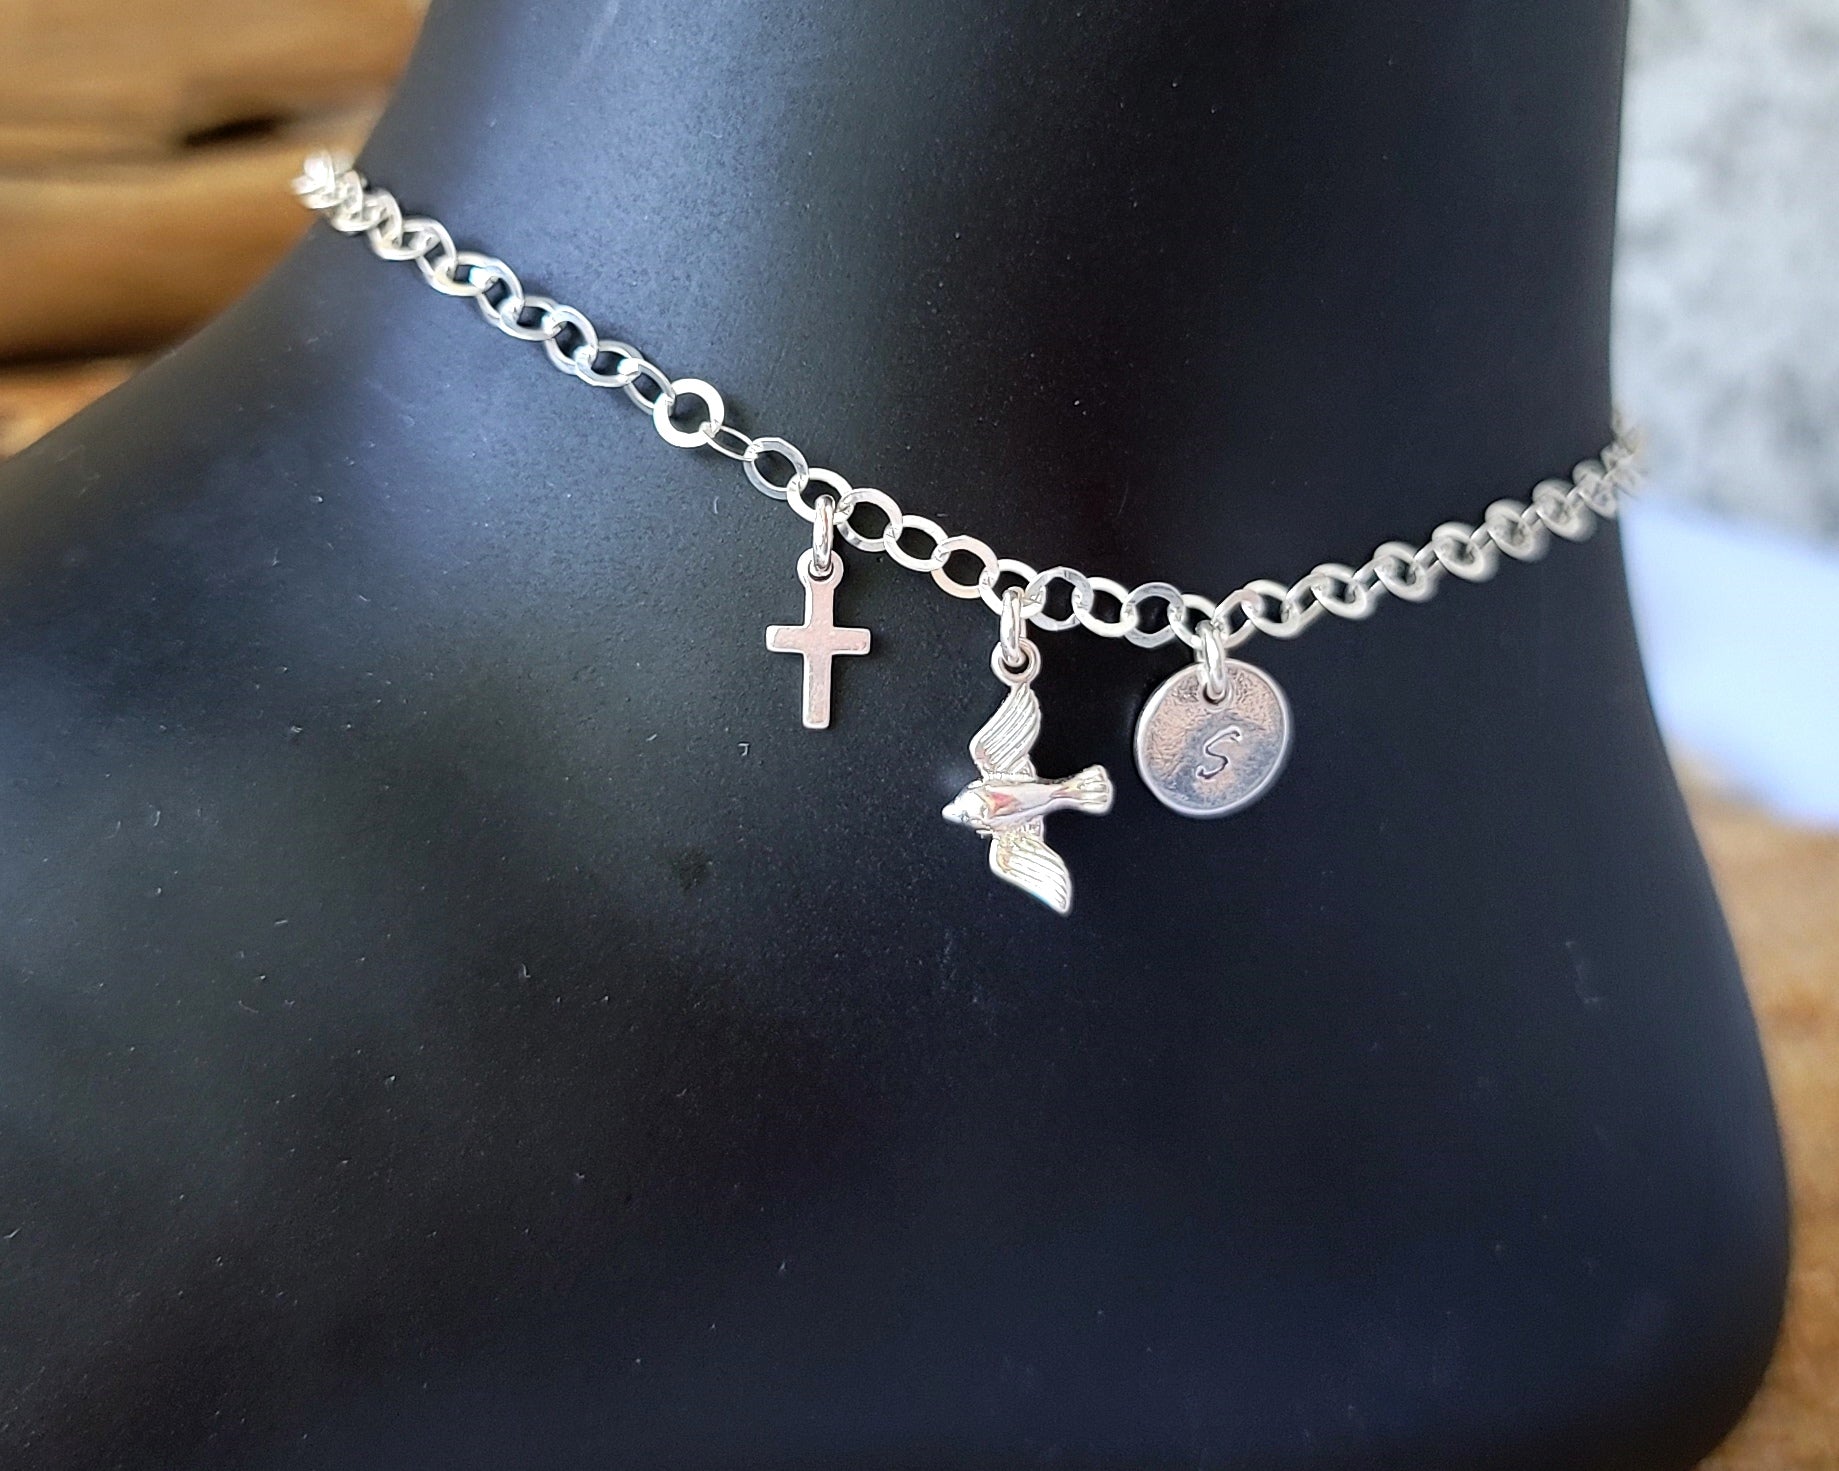 Deluxe Personalized Bird Cross Initial Ankle Bracelet, Anklet, 925 Sterling Silver chain with dangling pendants